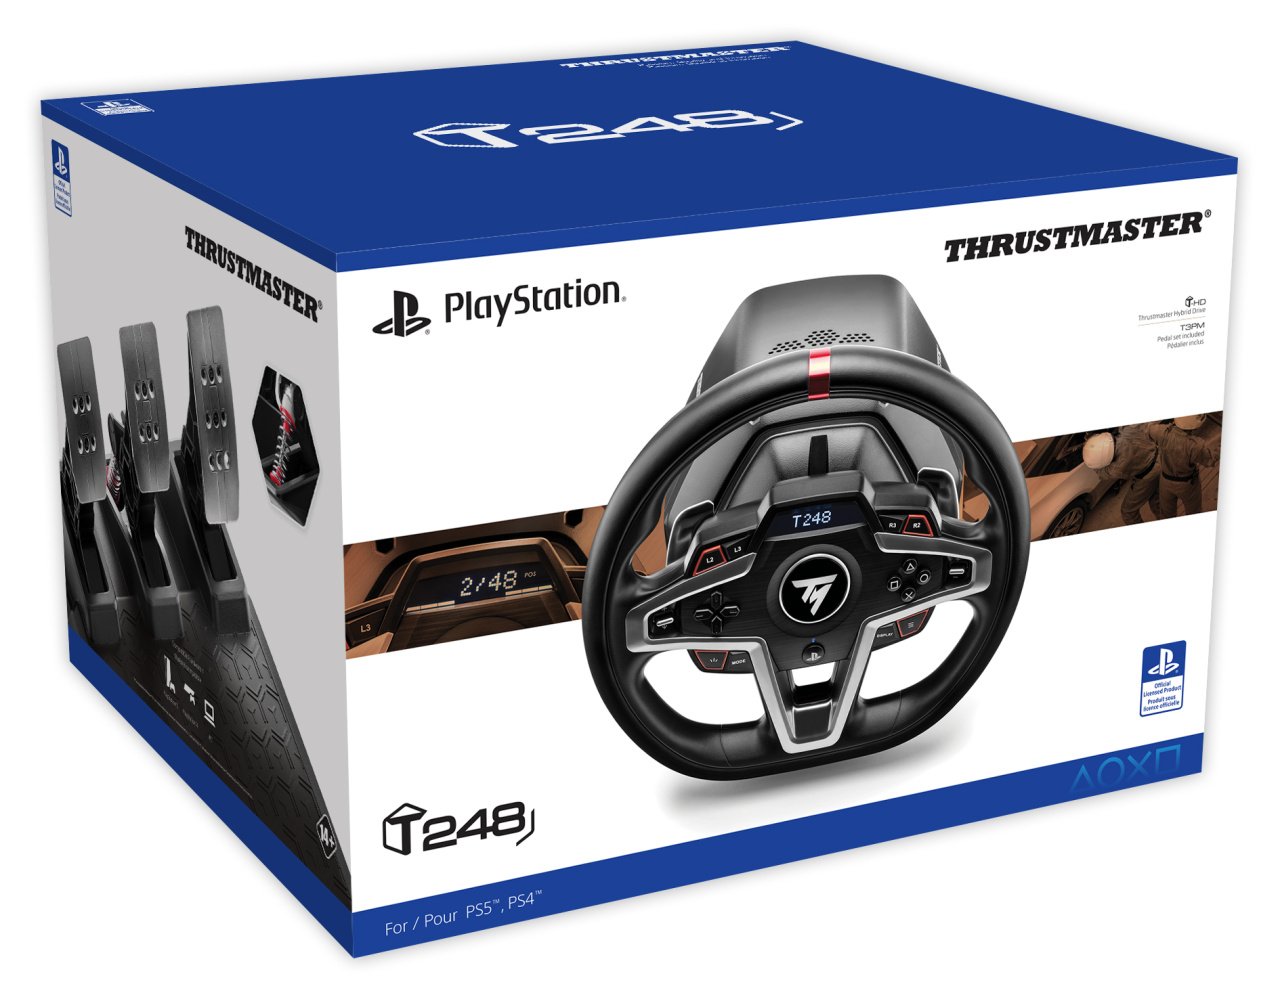 The Thrustmaster T248 Wheel Review